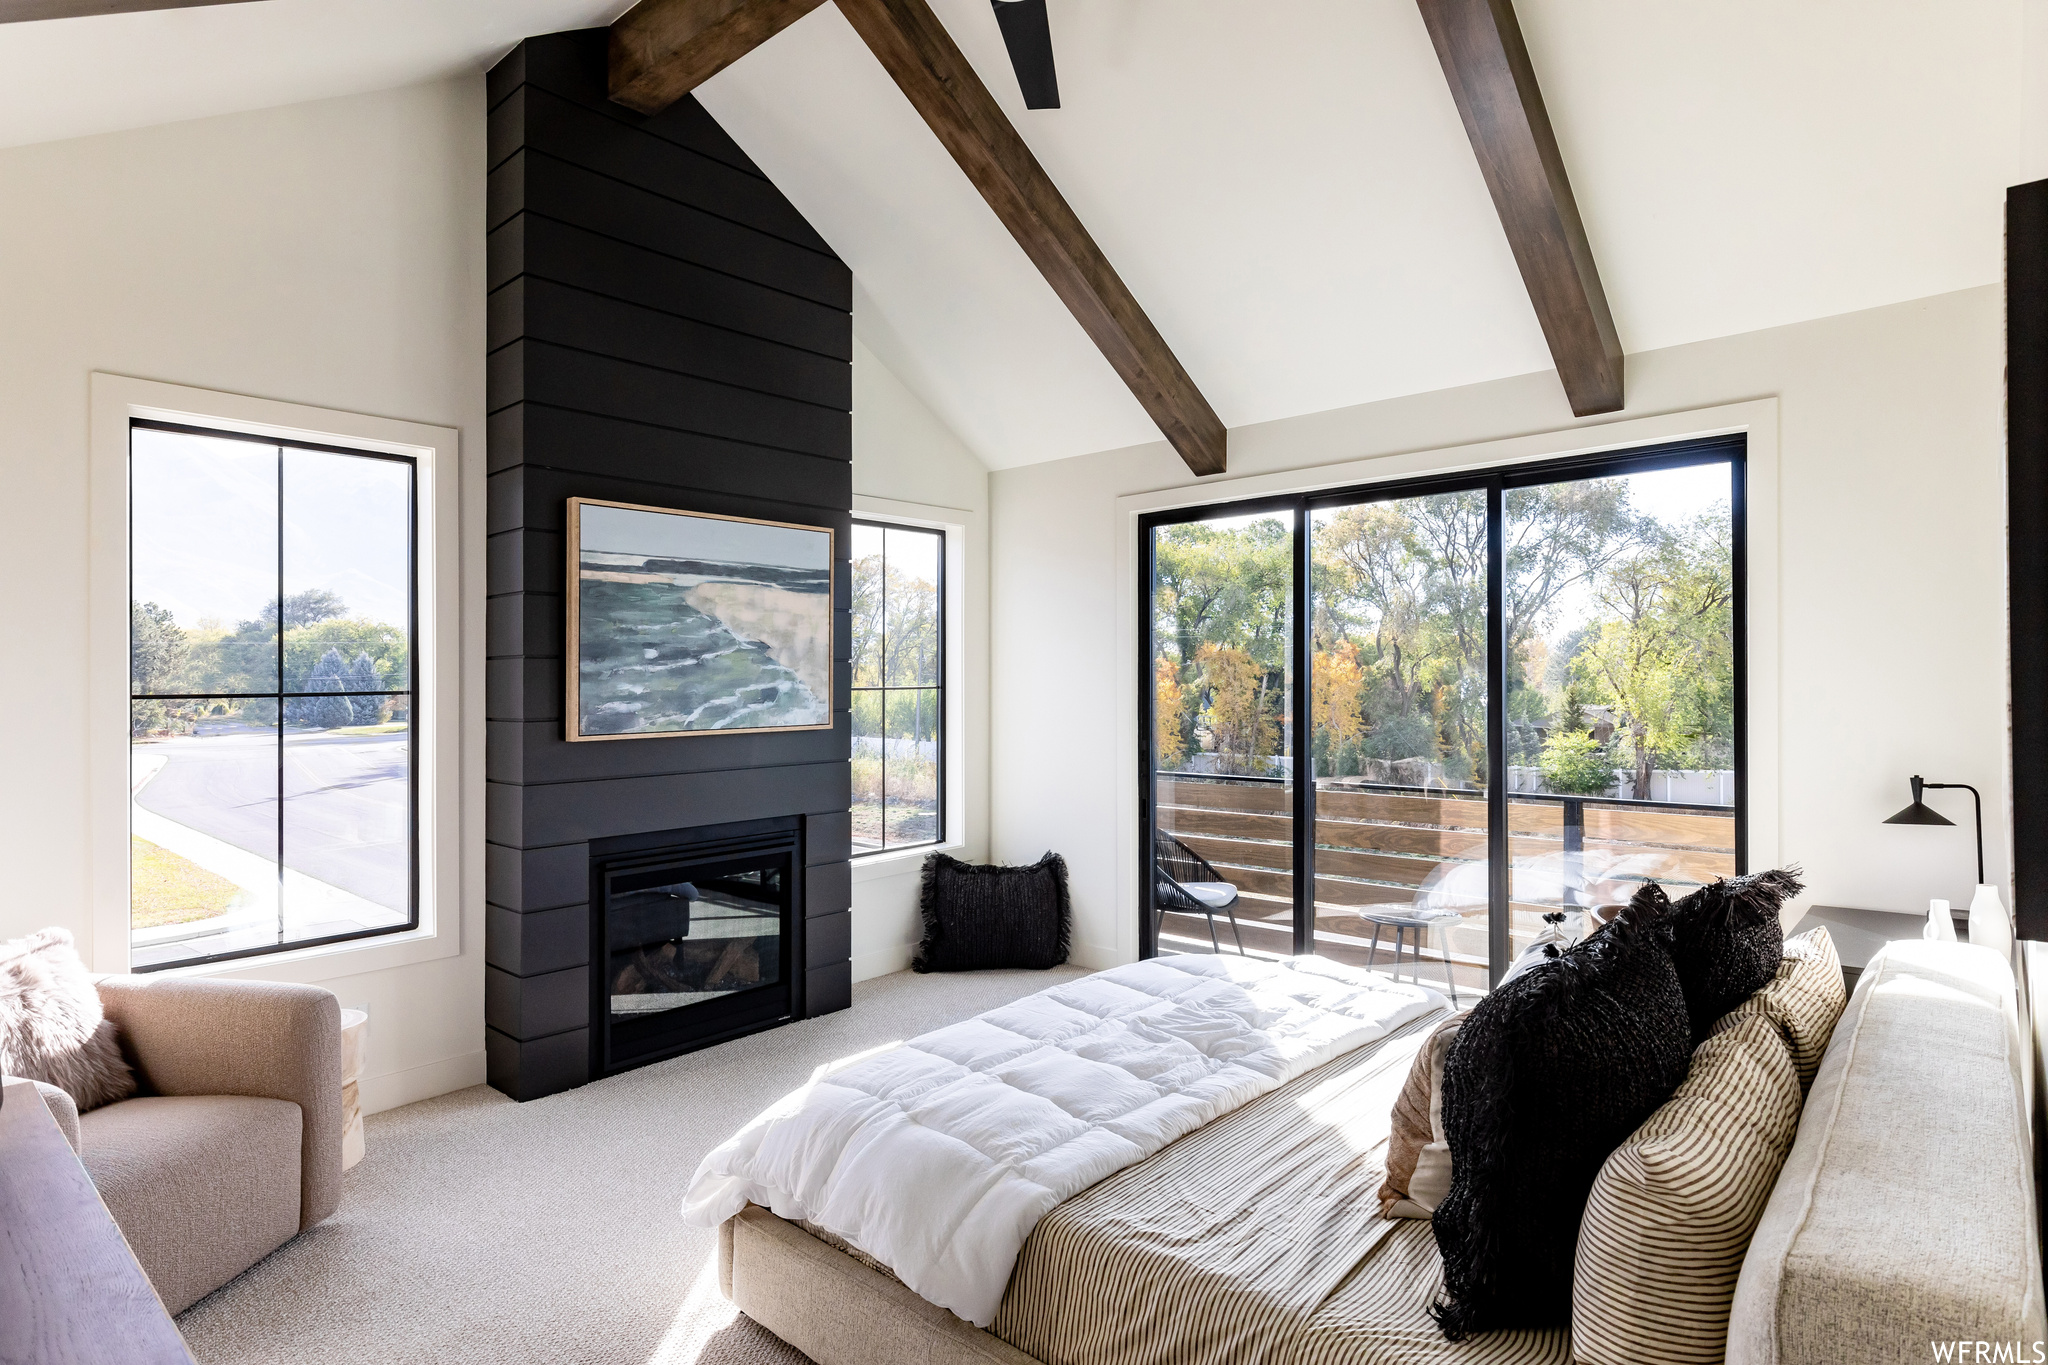 Bedroom featuring multiple windows, light carpet, beam ceiling, and a fireplace